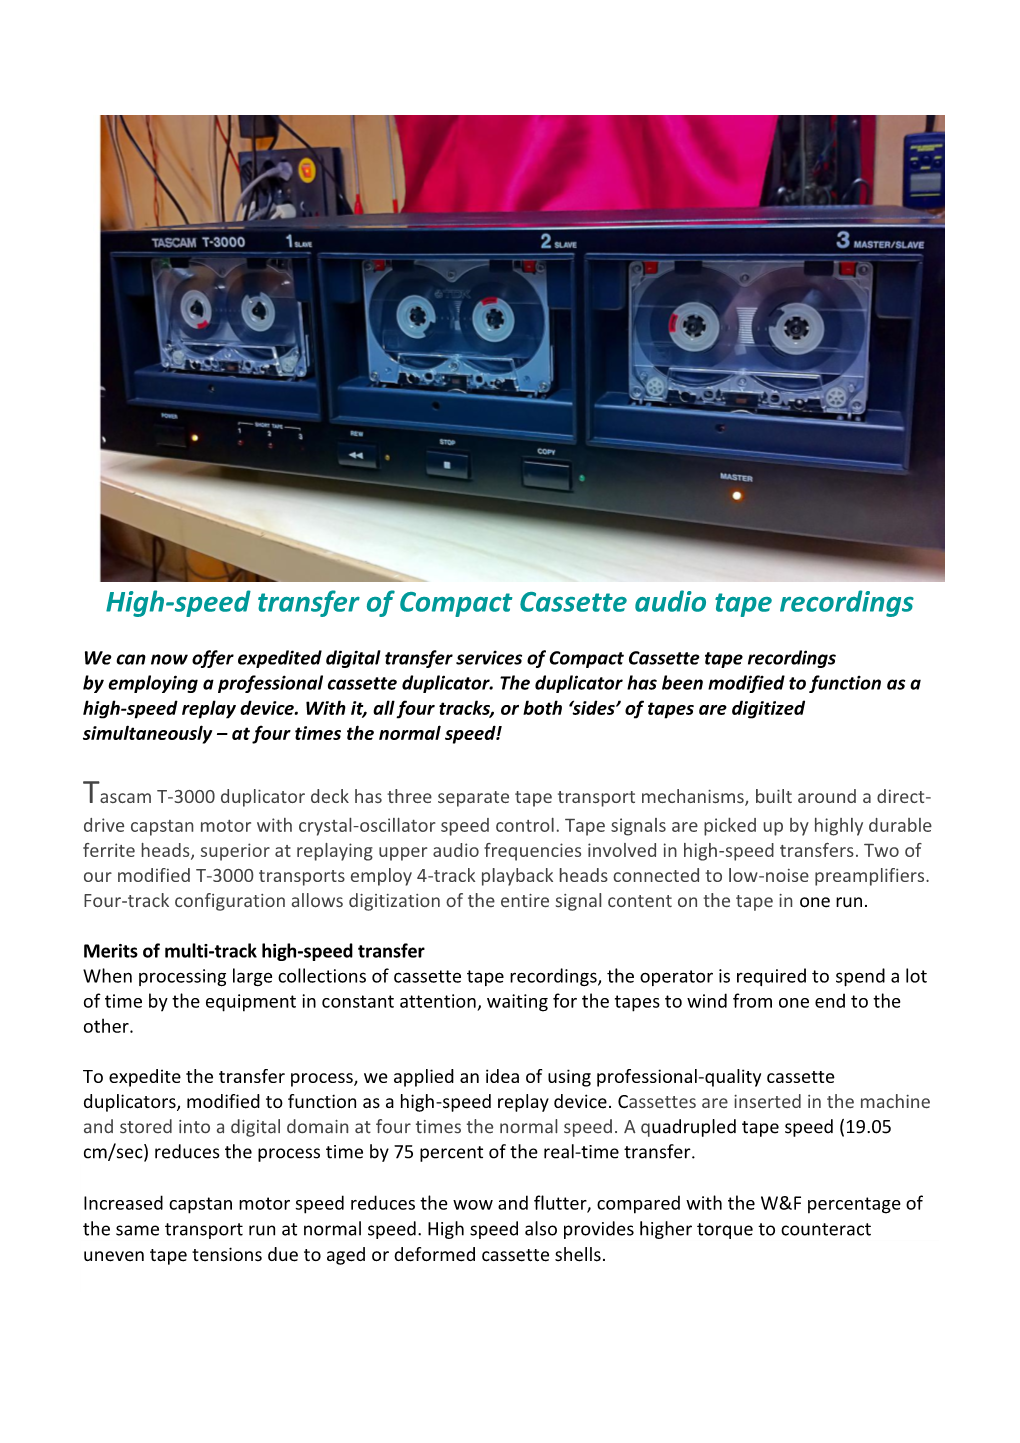 High-Speed Transfer of Compact Cassette Audio Tape Recordings